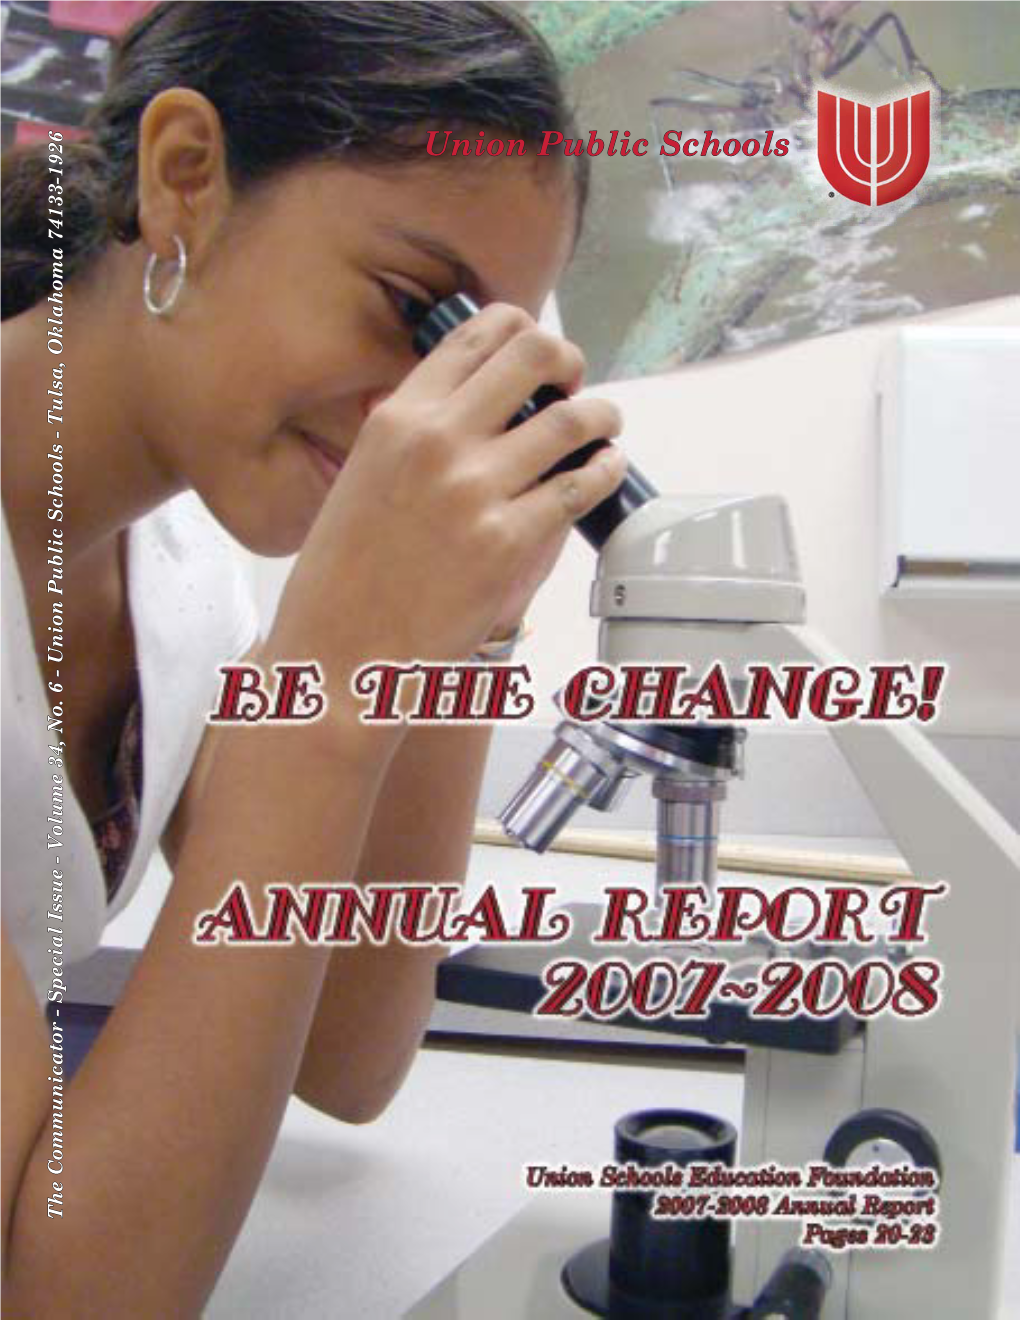 2007-2008 Annual Report FINAL.Indd